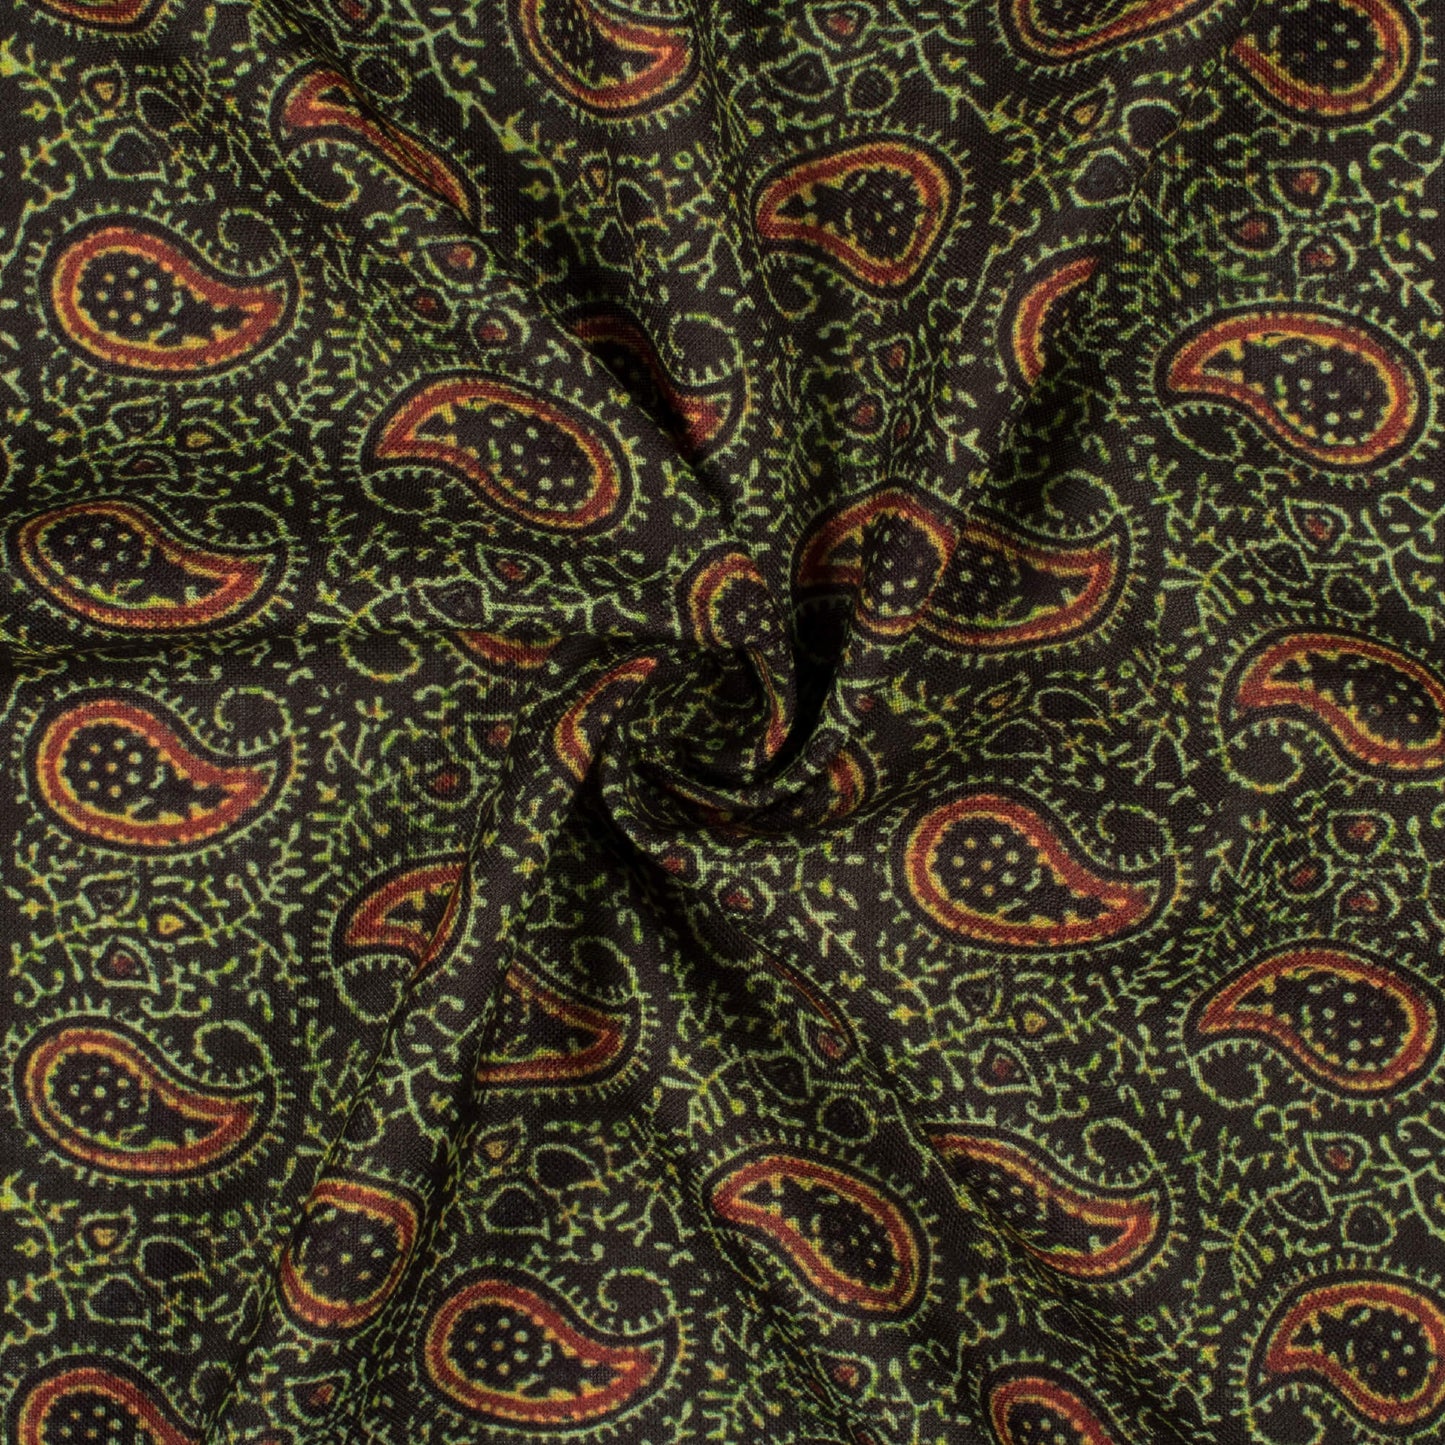 Black And Fern Green Paisley Pattern Digital Print Linen Textured Fabric (Width 56 Inches)